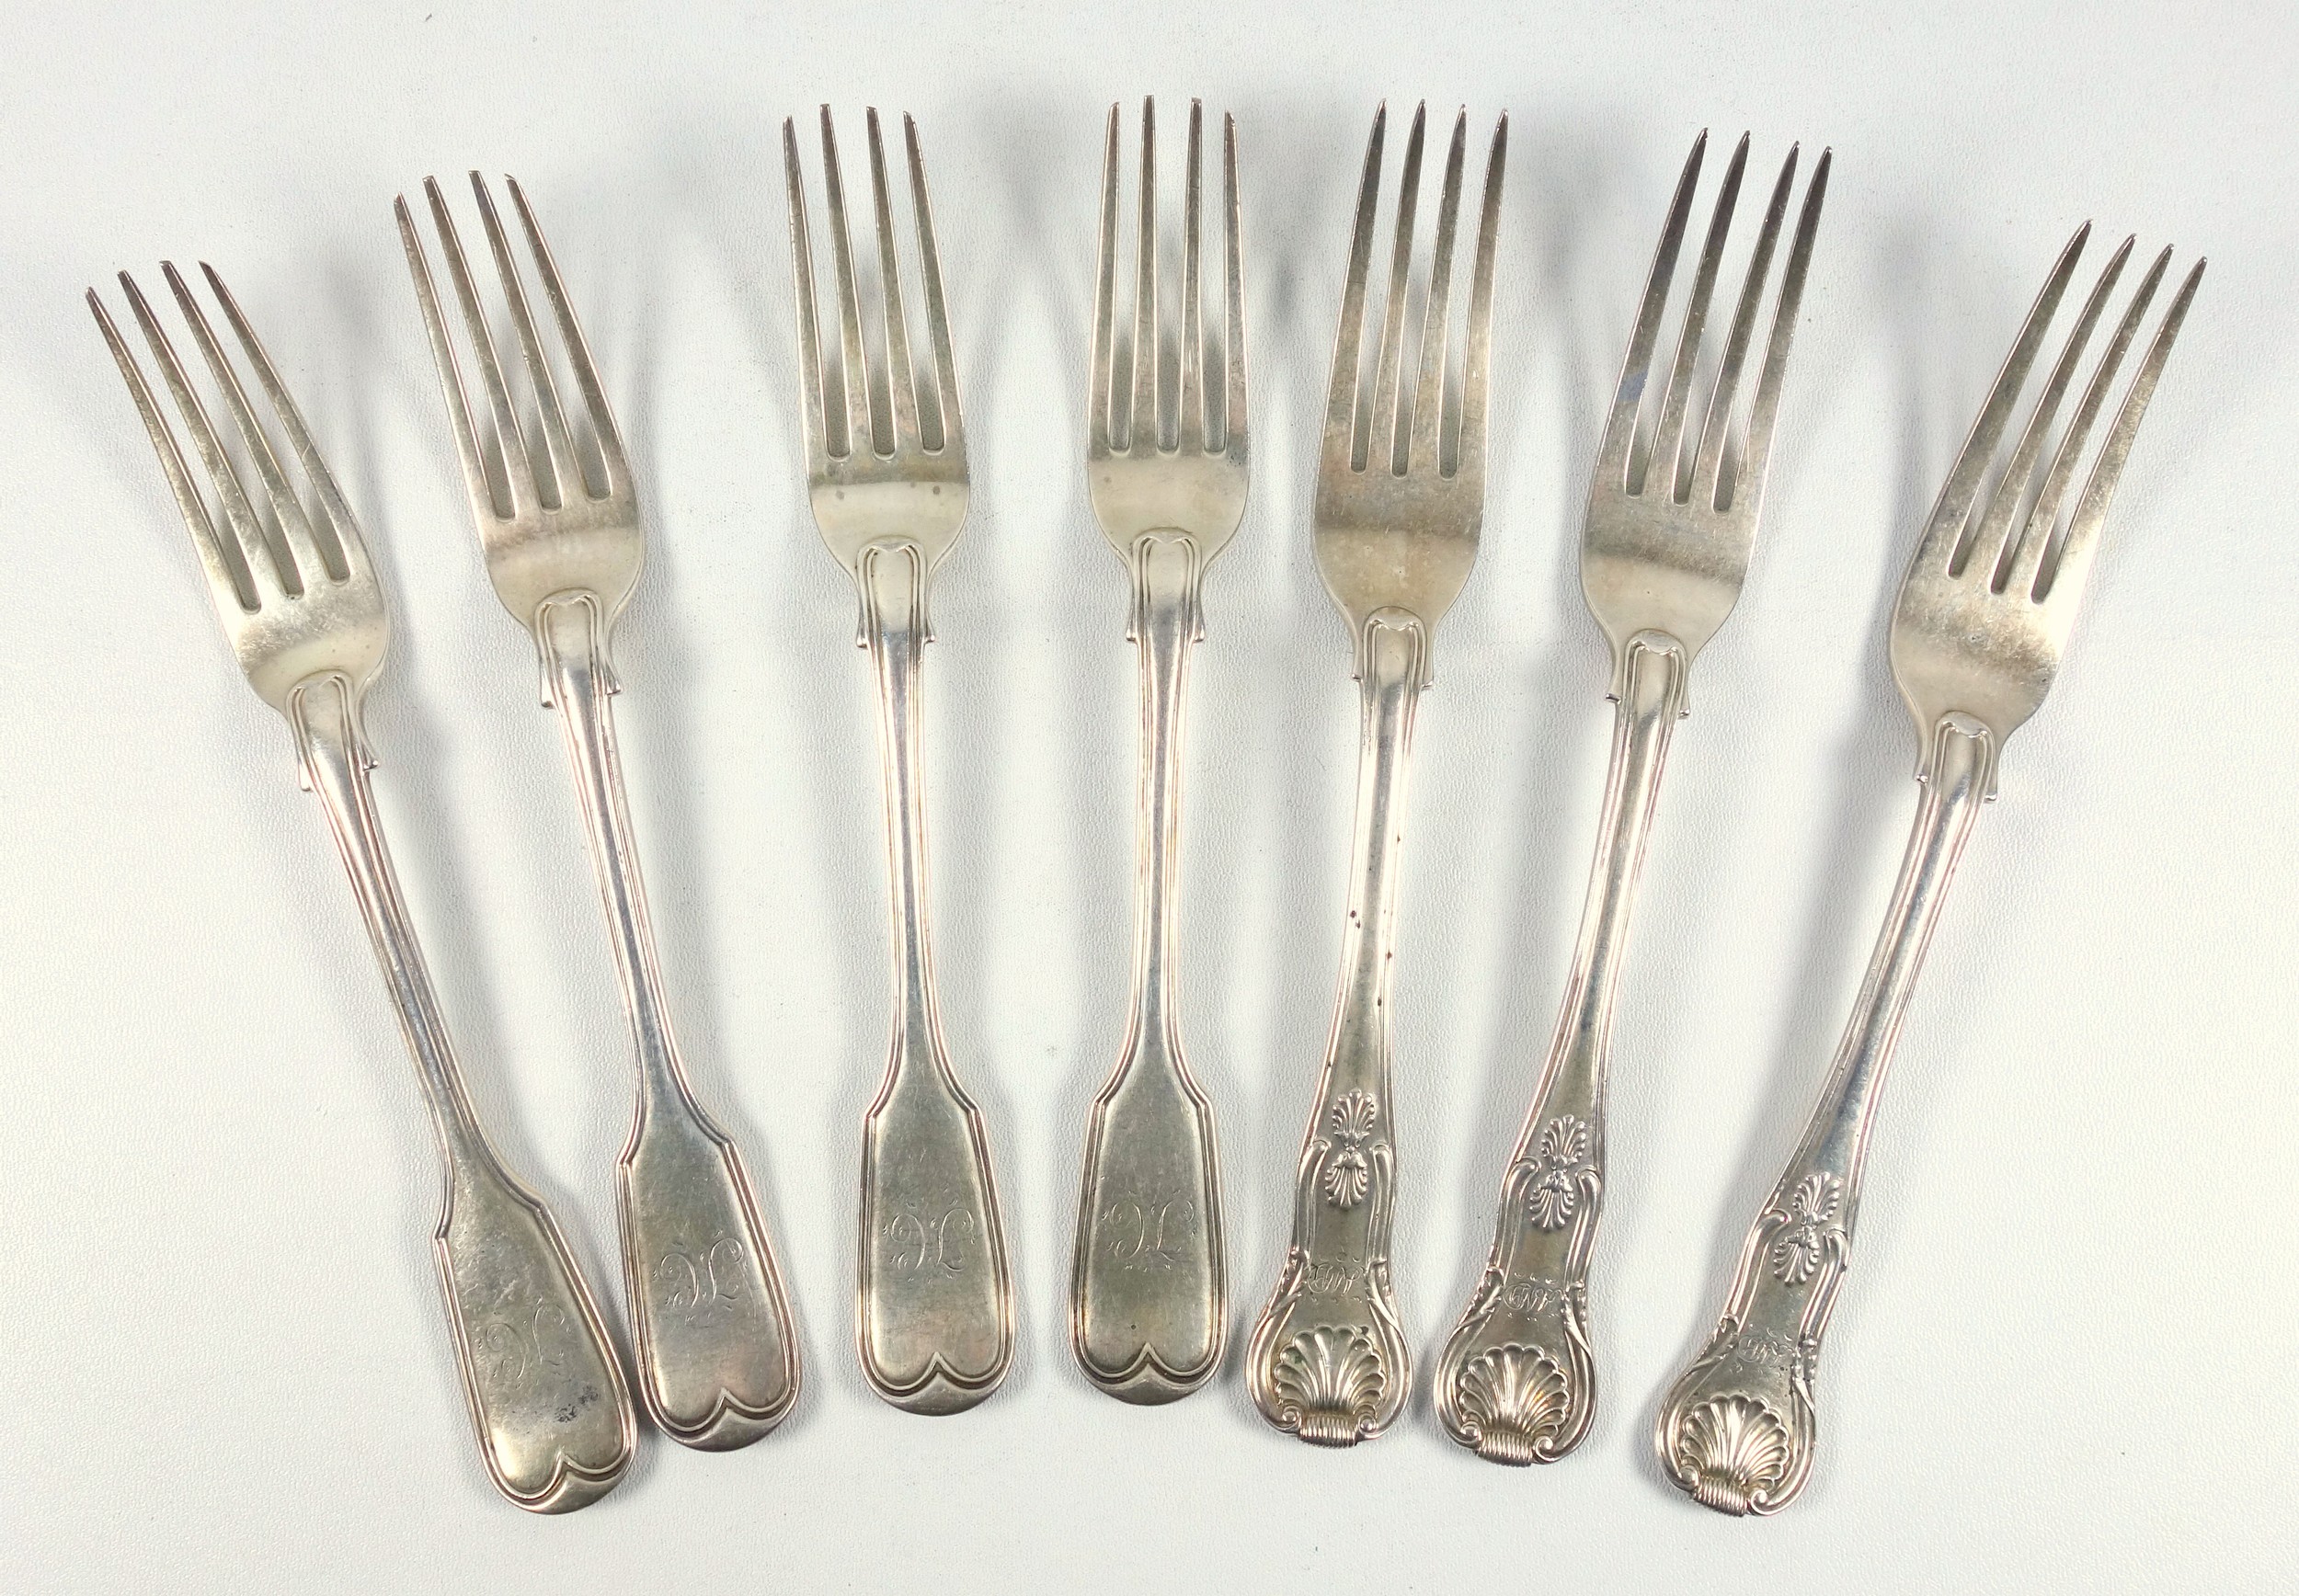 Three William IV silver table forks, with a shell handle and monogram, London 1834, and 4